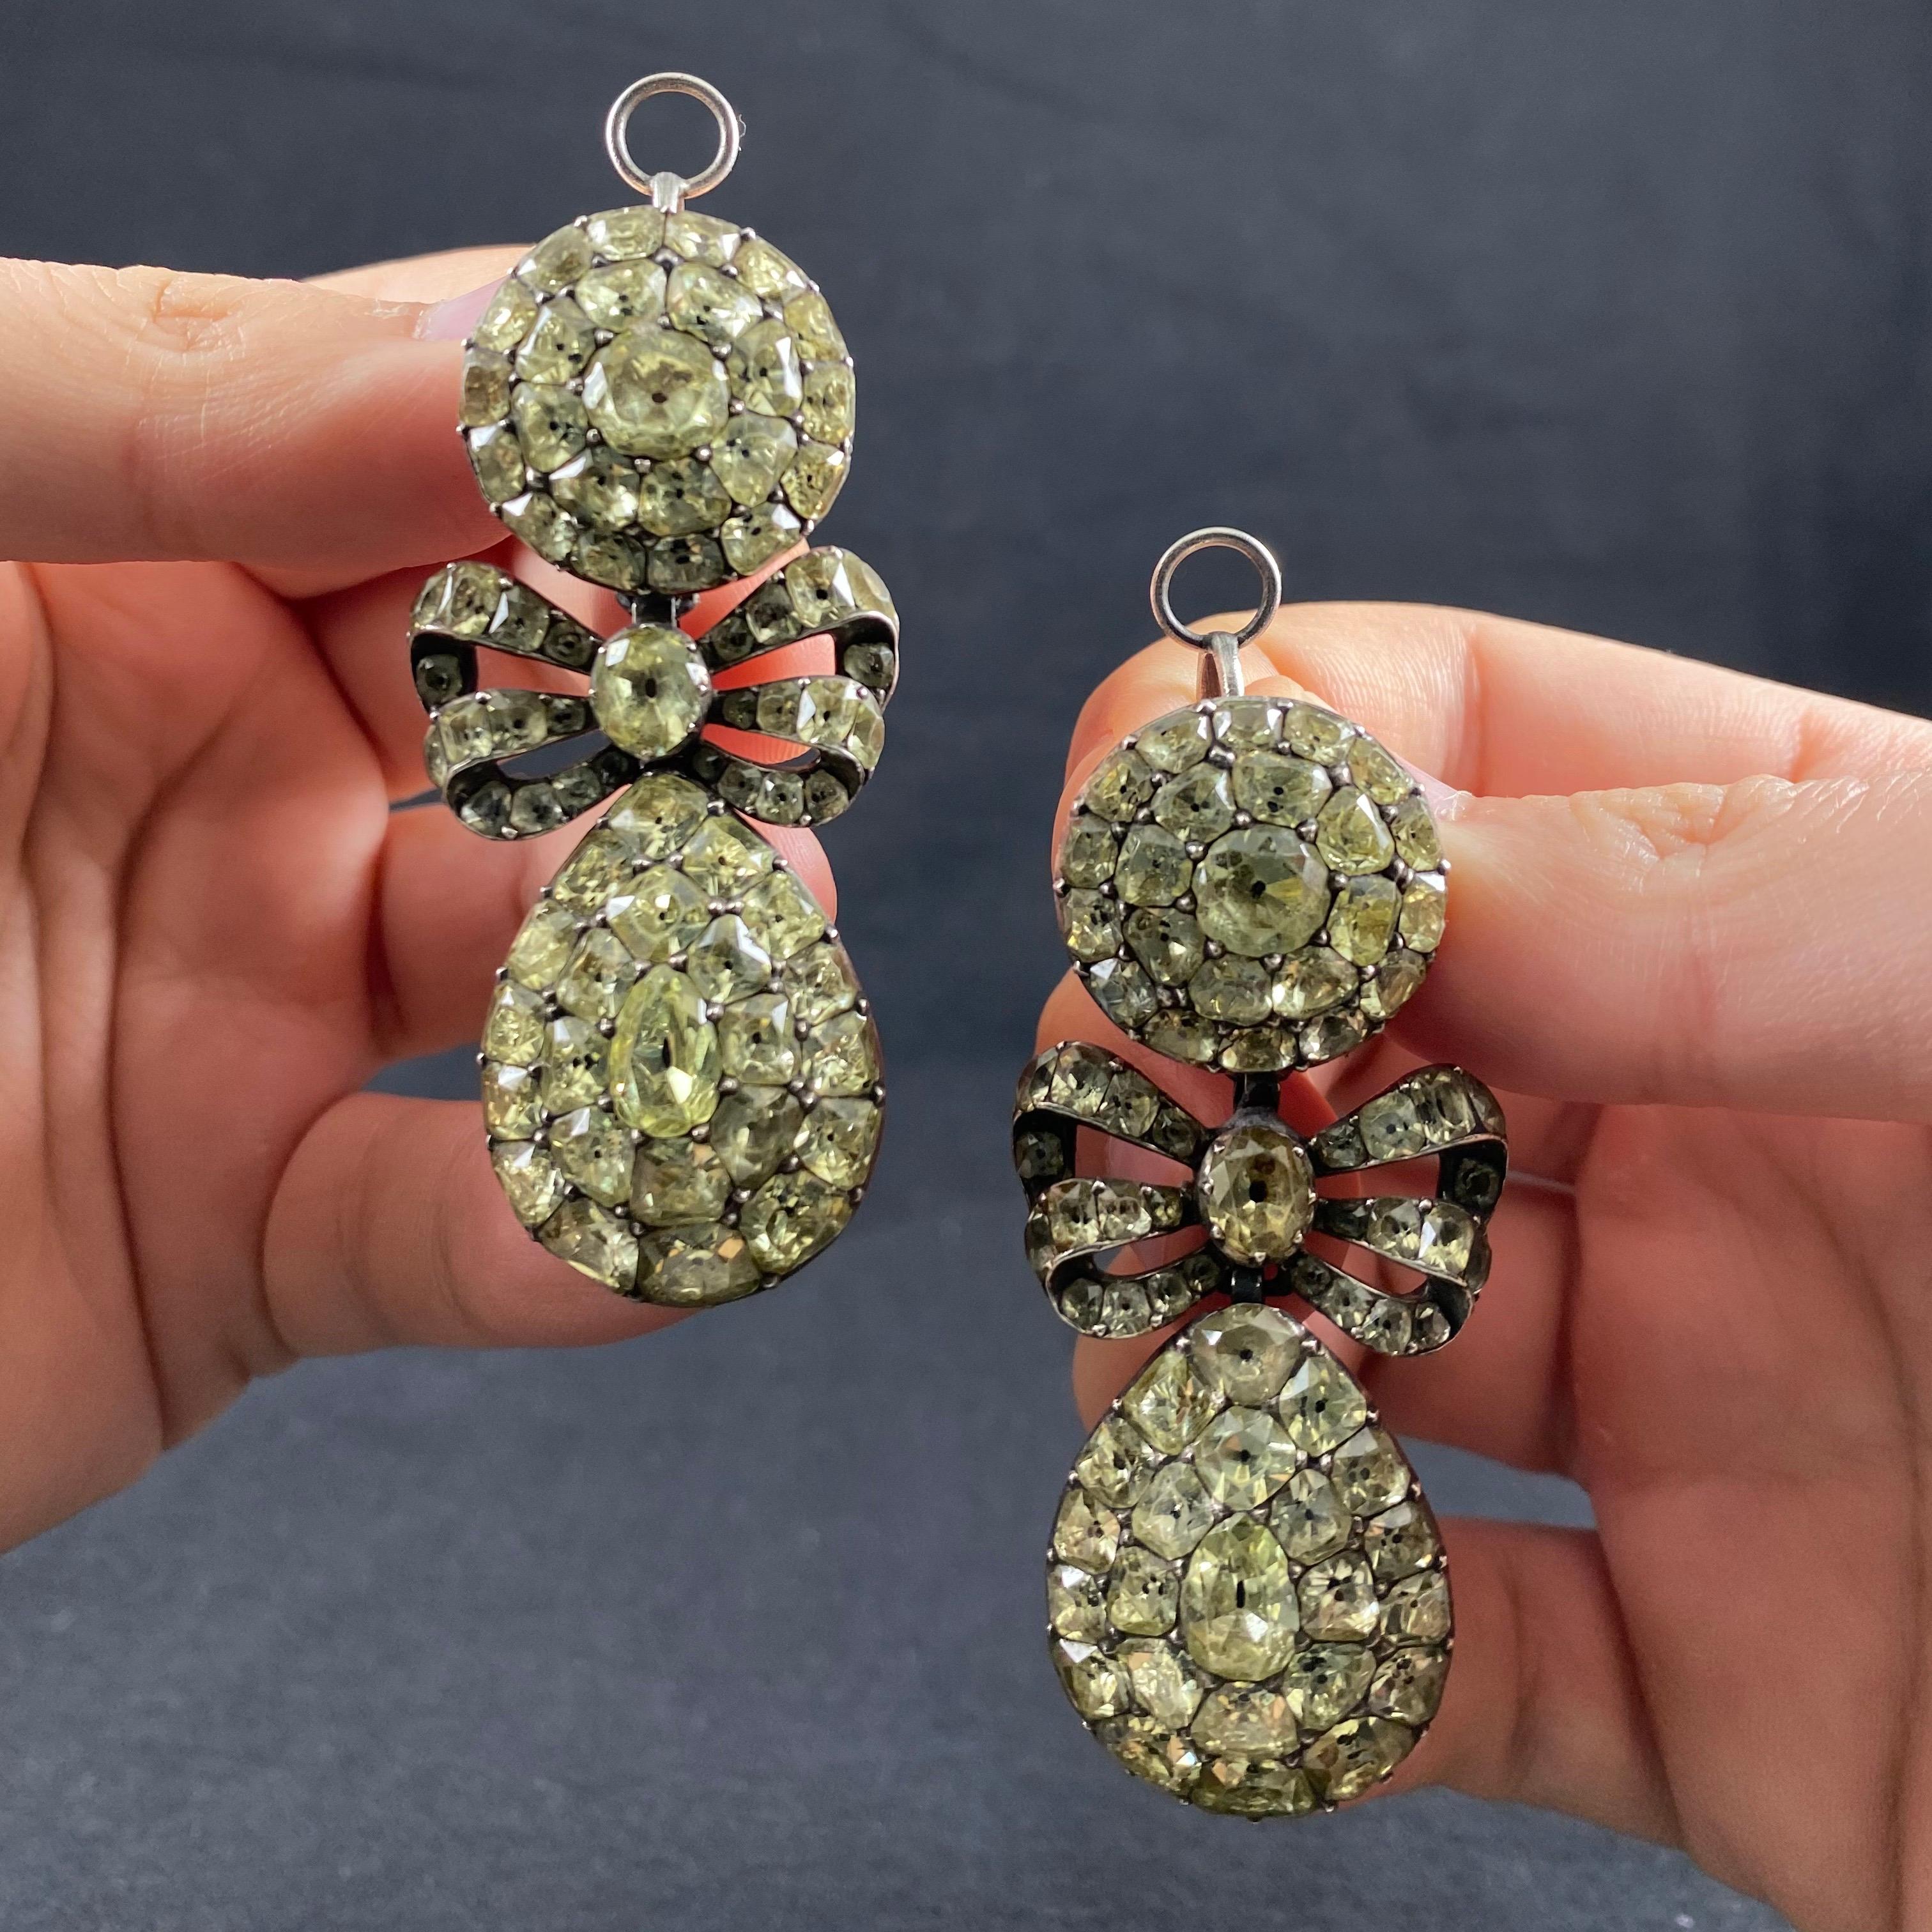 Extremely Rare Museum Quality Antique 18th Century Chrysolite Chrysoberyl Pendeloque Pendant Earrings, Portugal, c. 1770, fitted in antique red leather case with golden decorative accents. Each earring is designed with a circular cluster surmount,